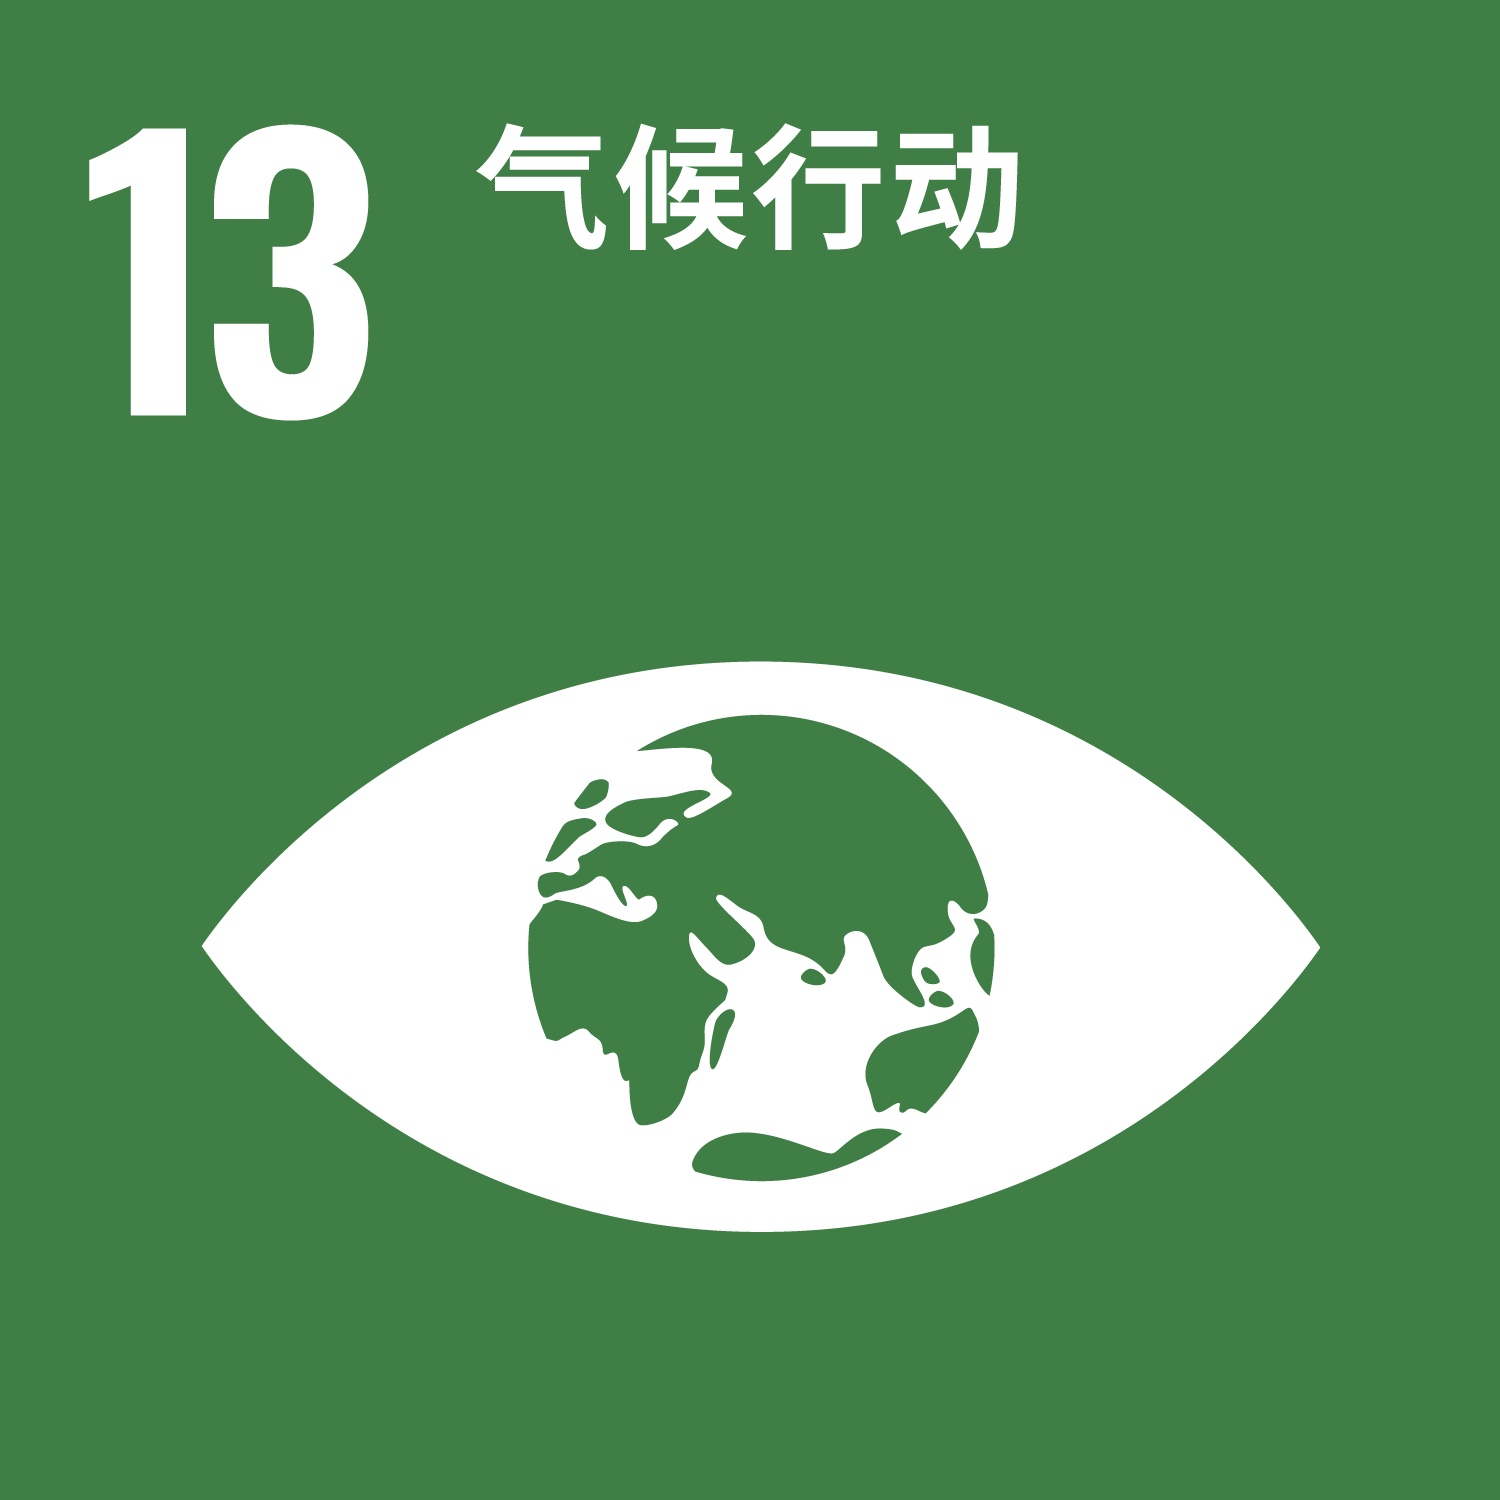 13 - CLIMATE ACTION